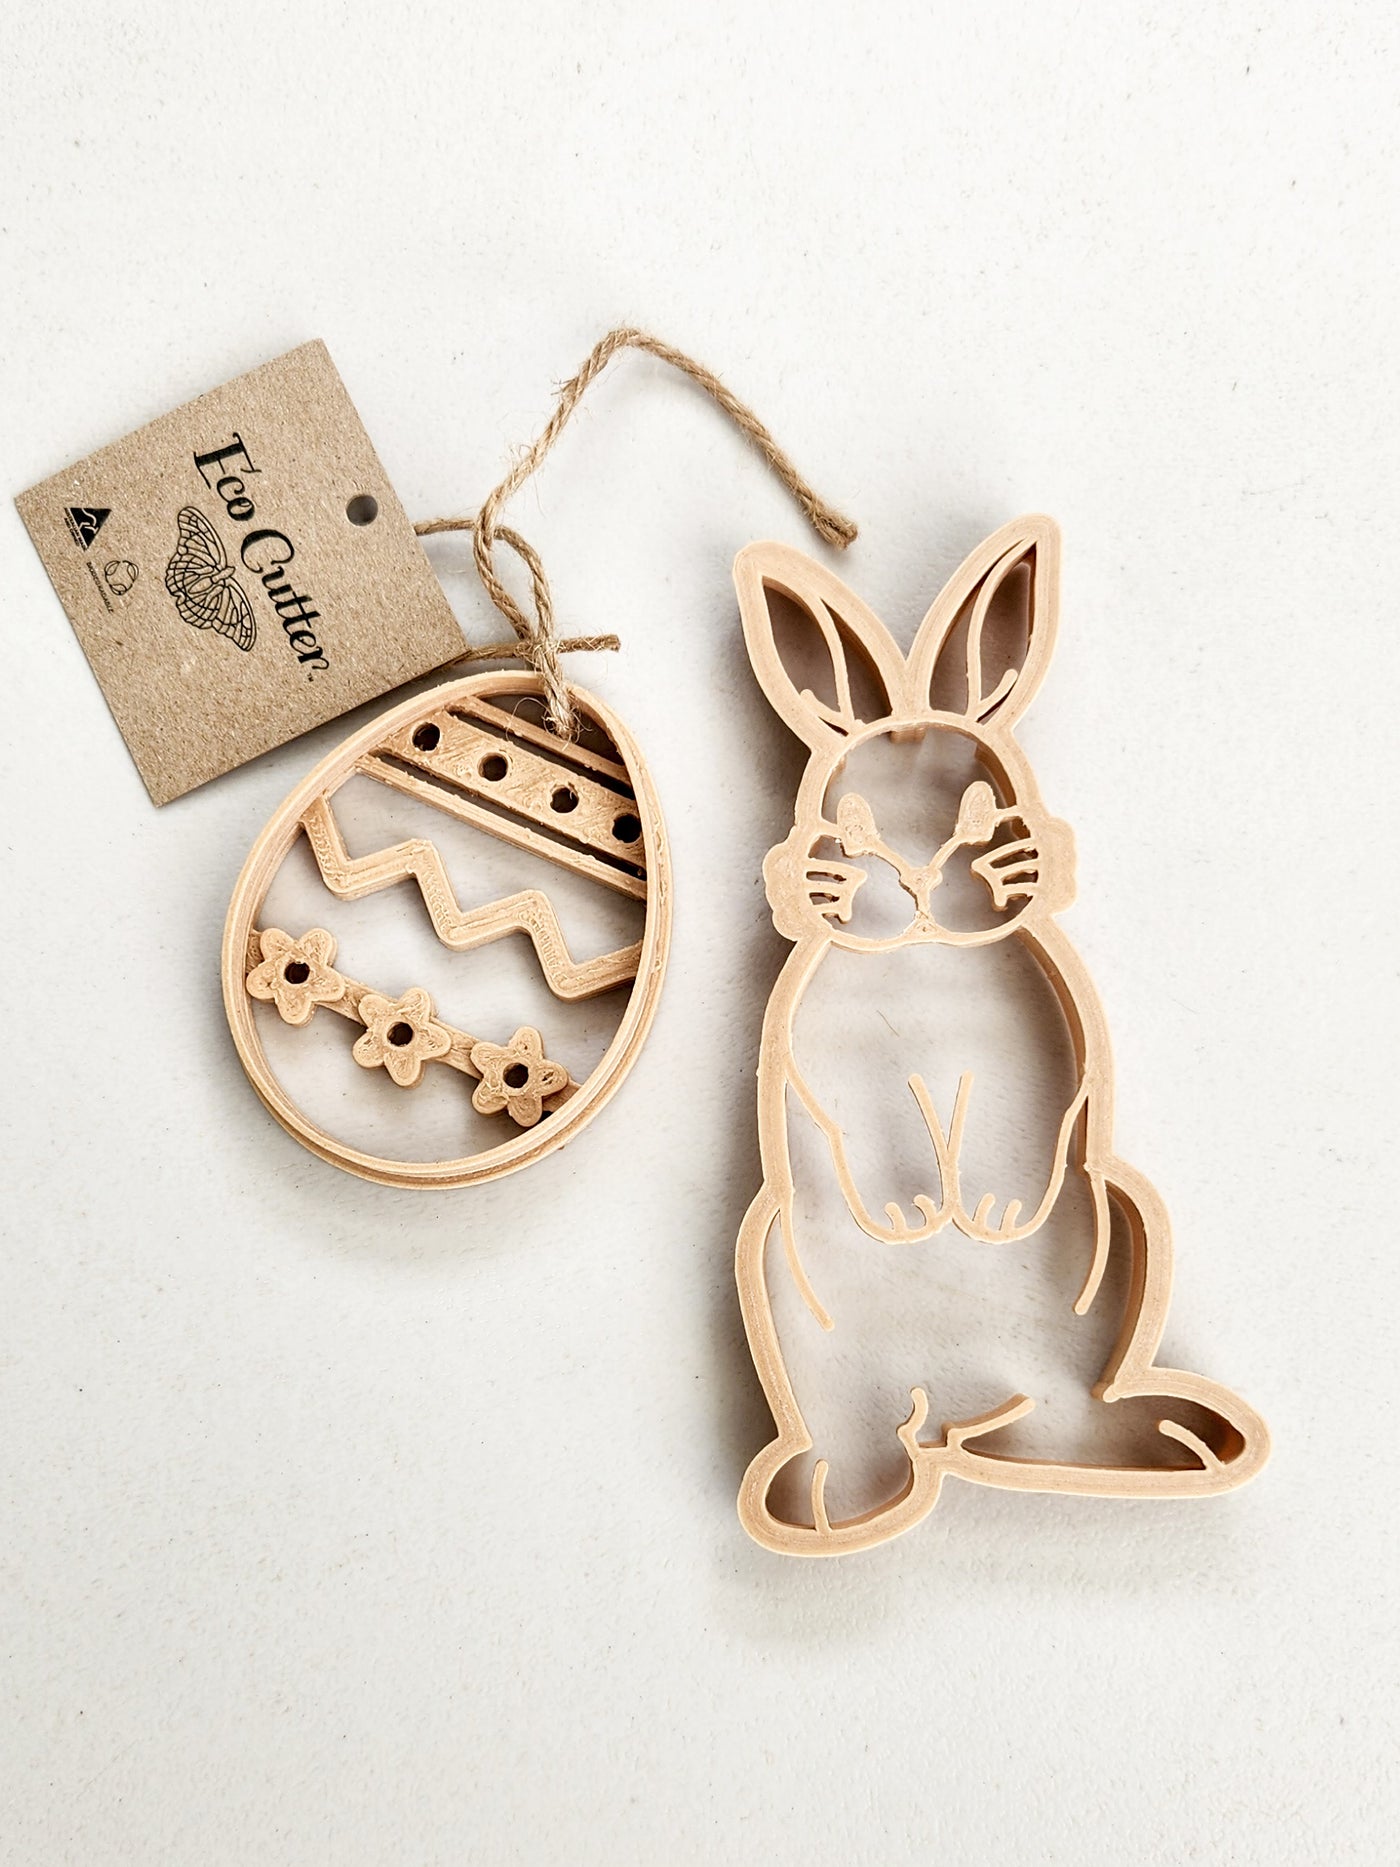 Bunny and egg cutter set